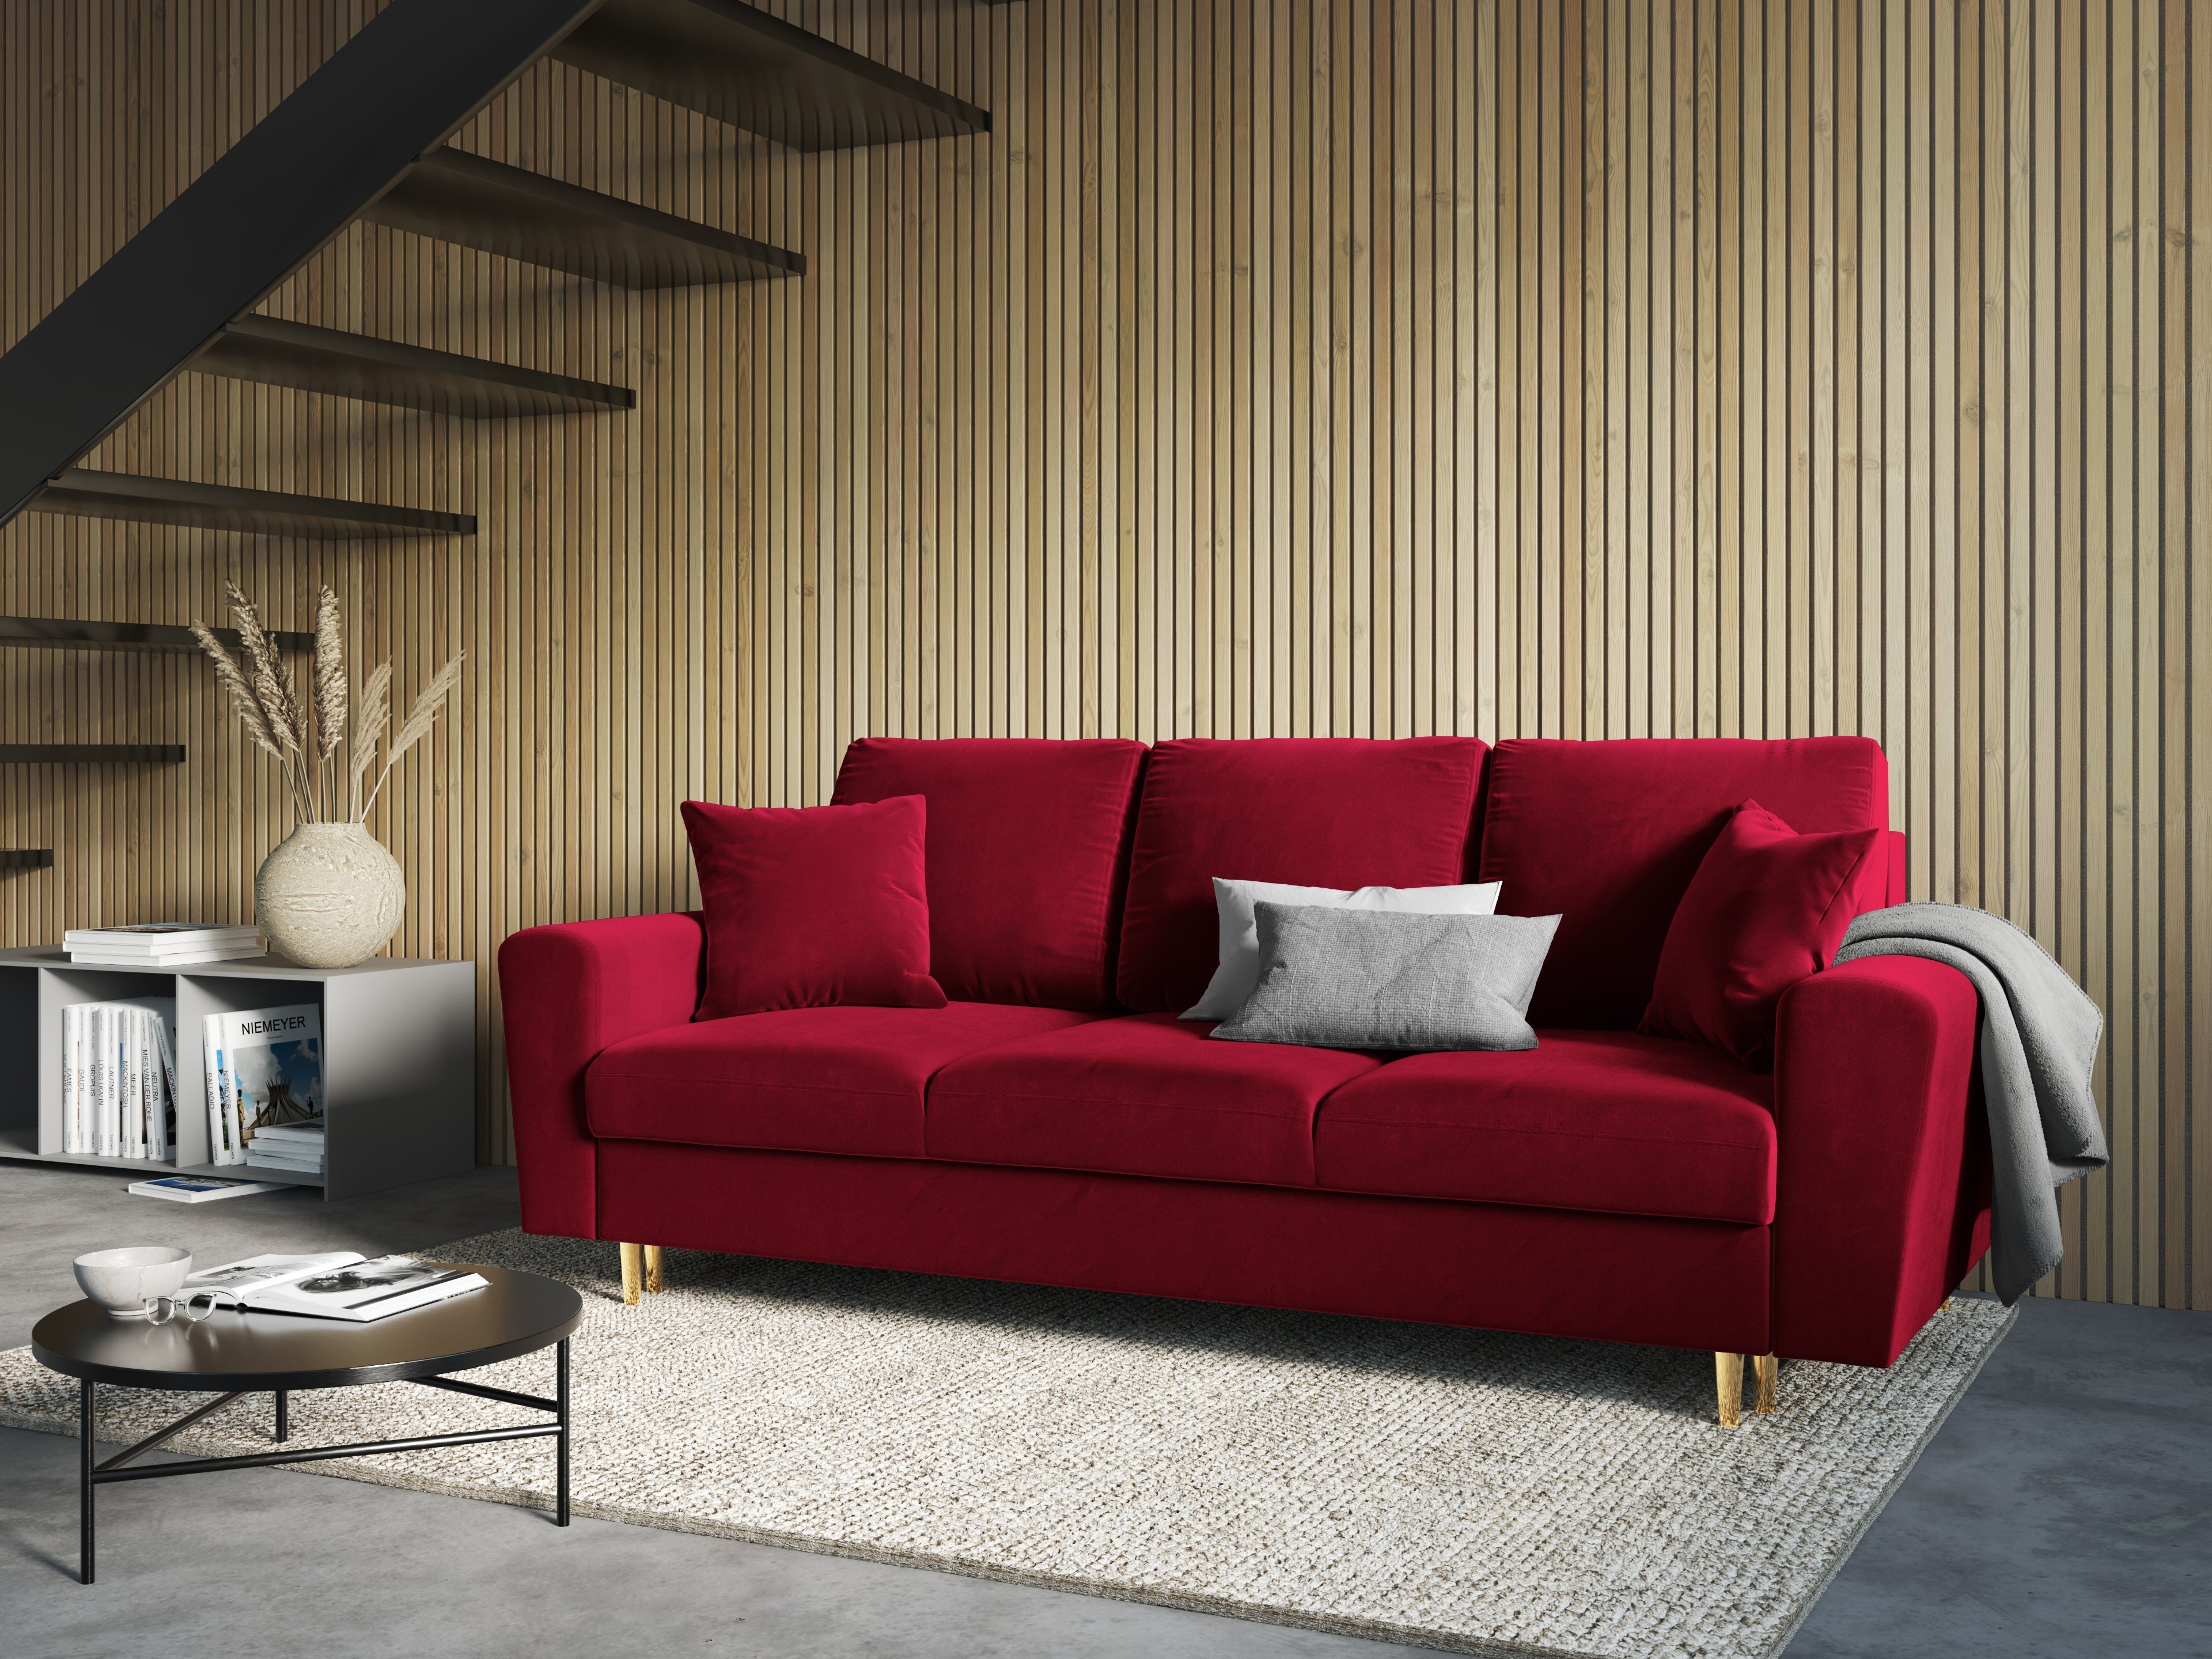 Sofa with a red sleeping function